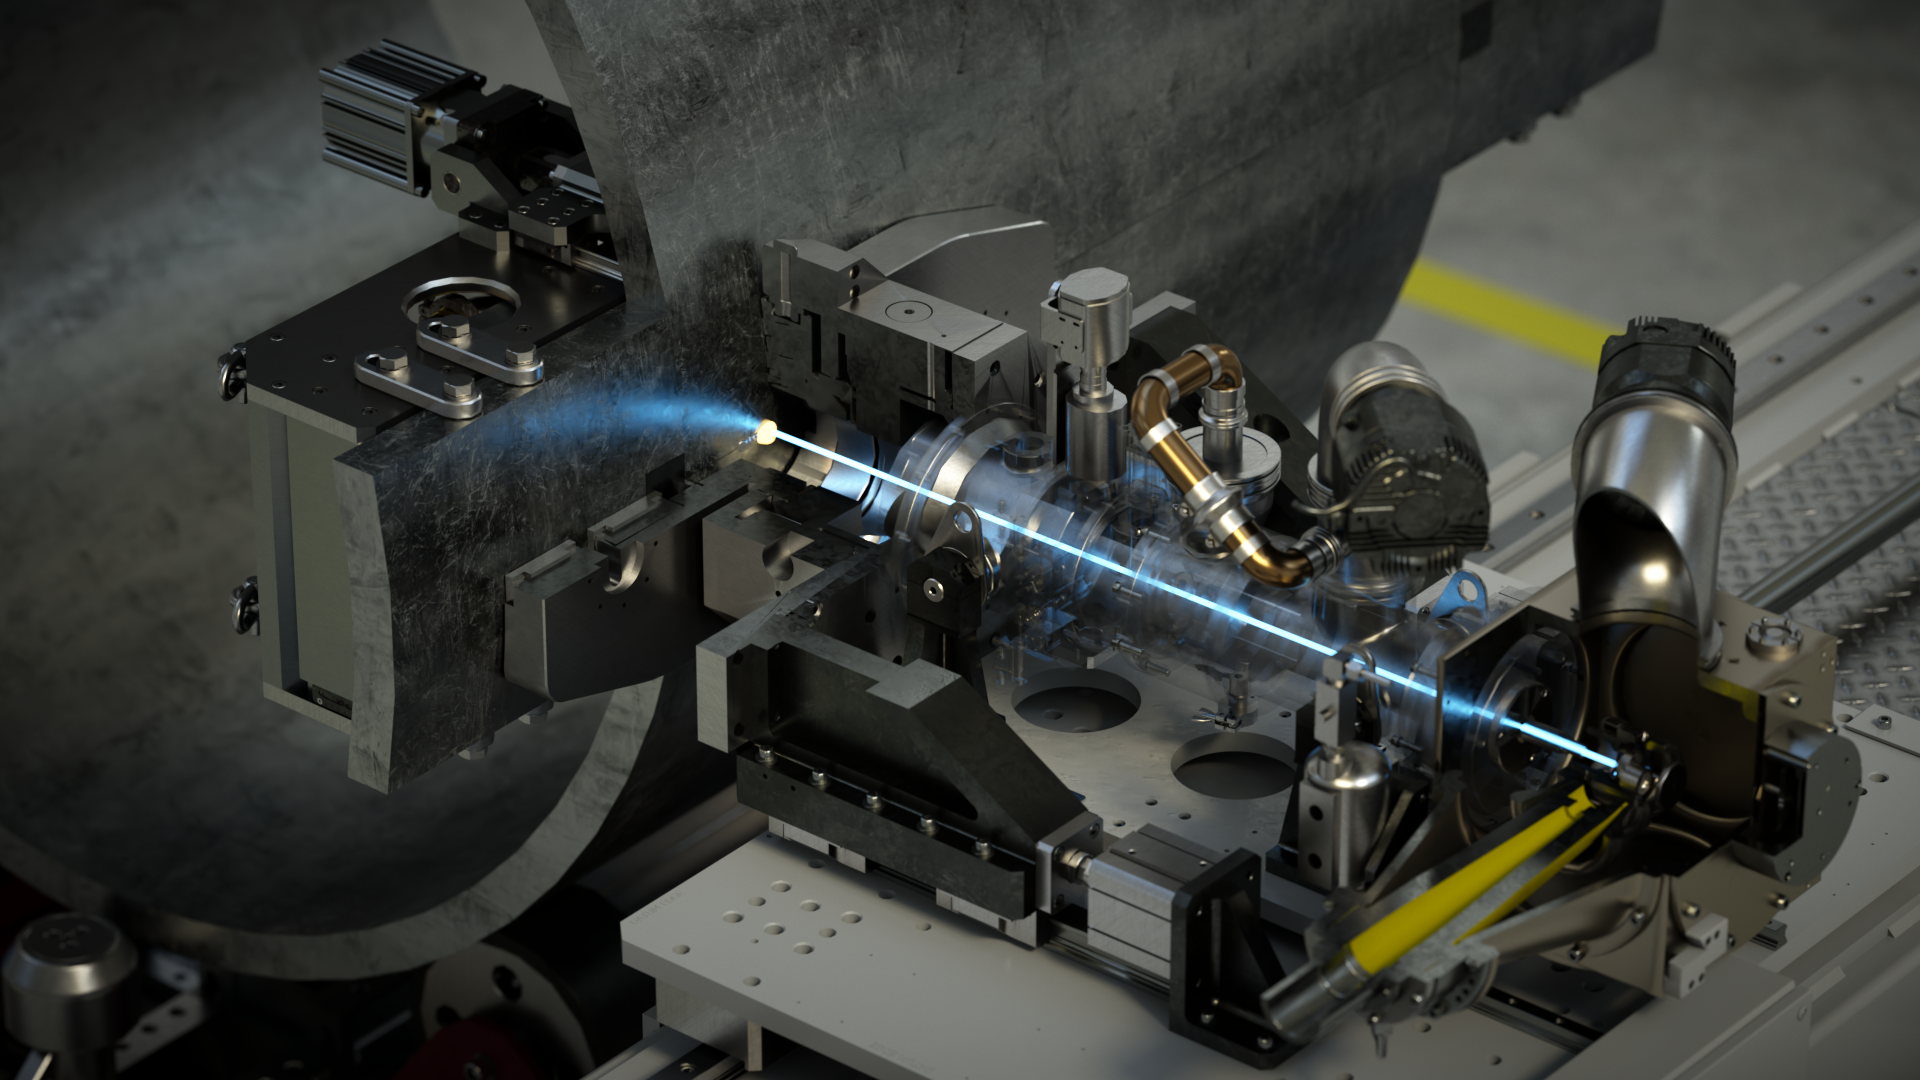 Ground-breaking Ebflow electron beam welding technology can drastically reduce production time of small nuclear reactors